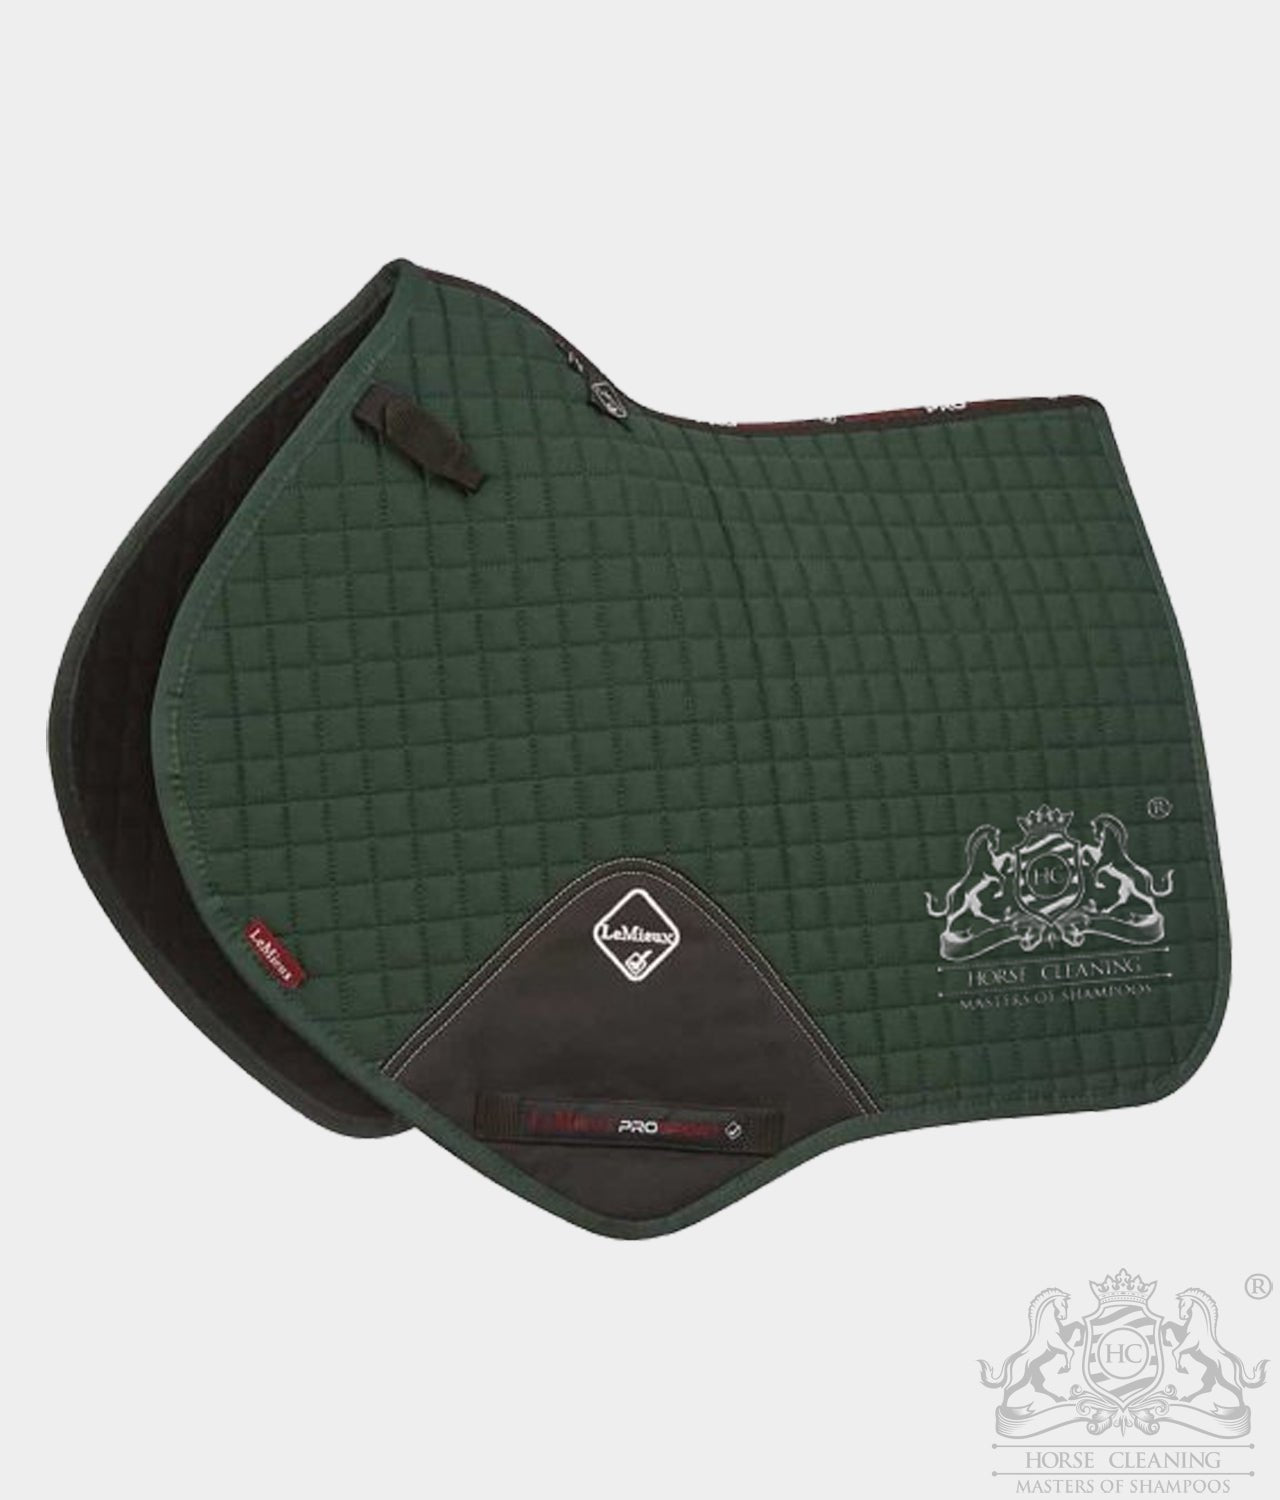 Horse Cleaning ProSport Green Close Contact Saddle Pad - Horse Cleaning Masters Of Shampoos ™